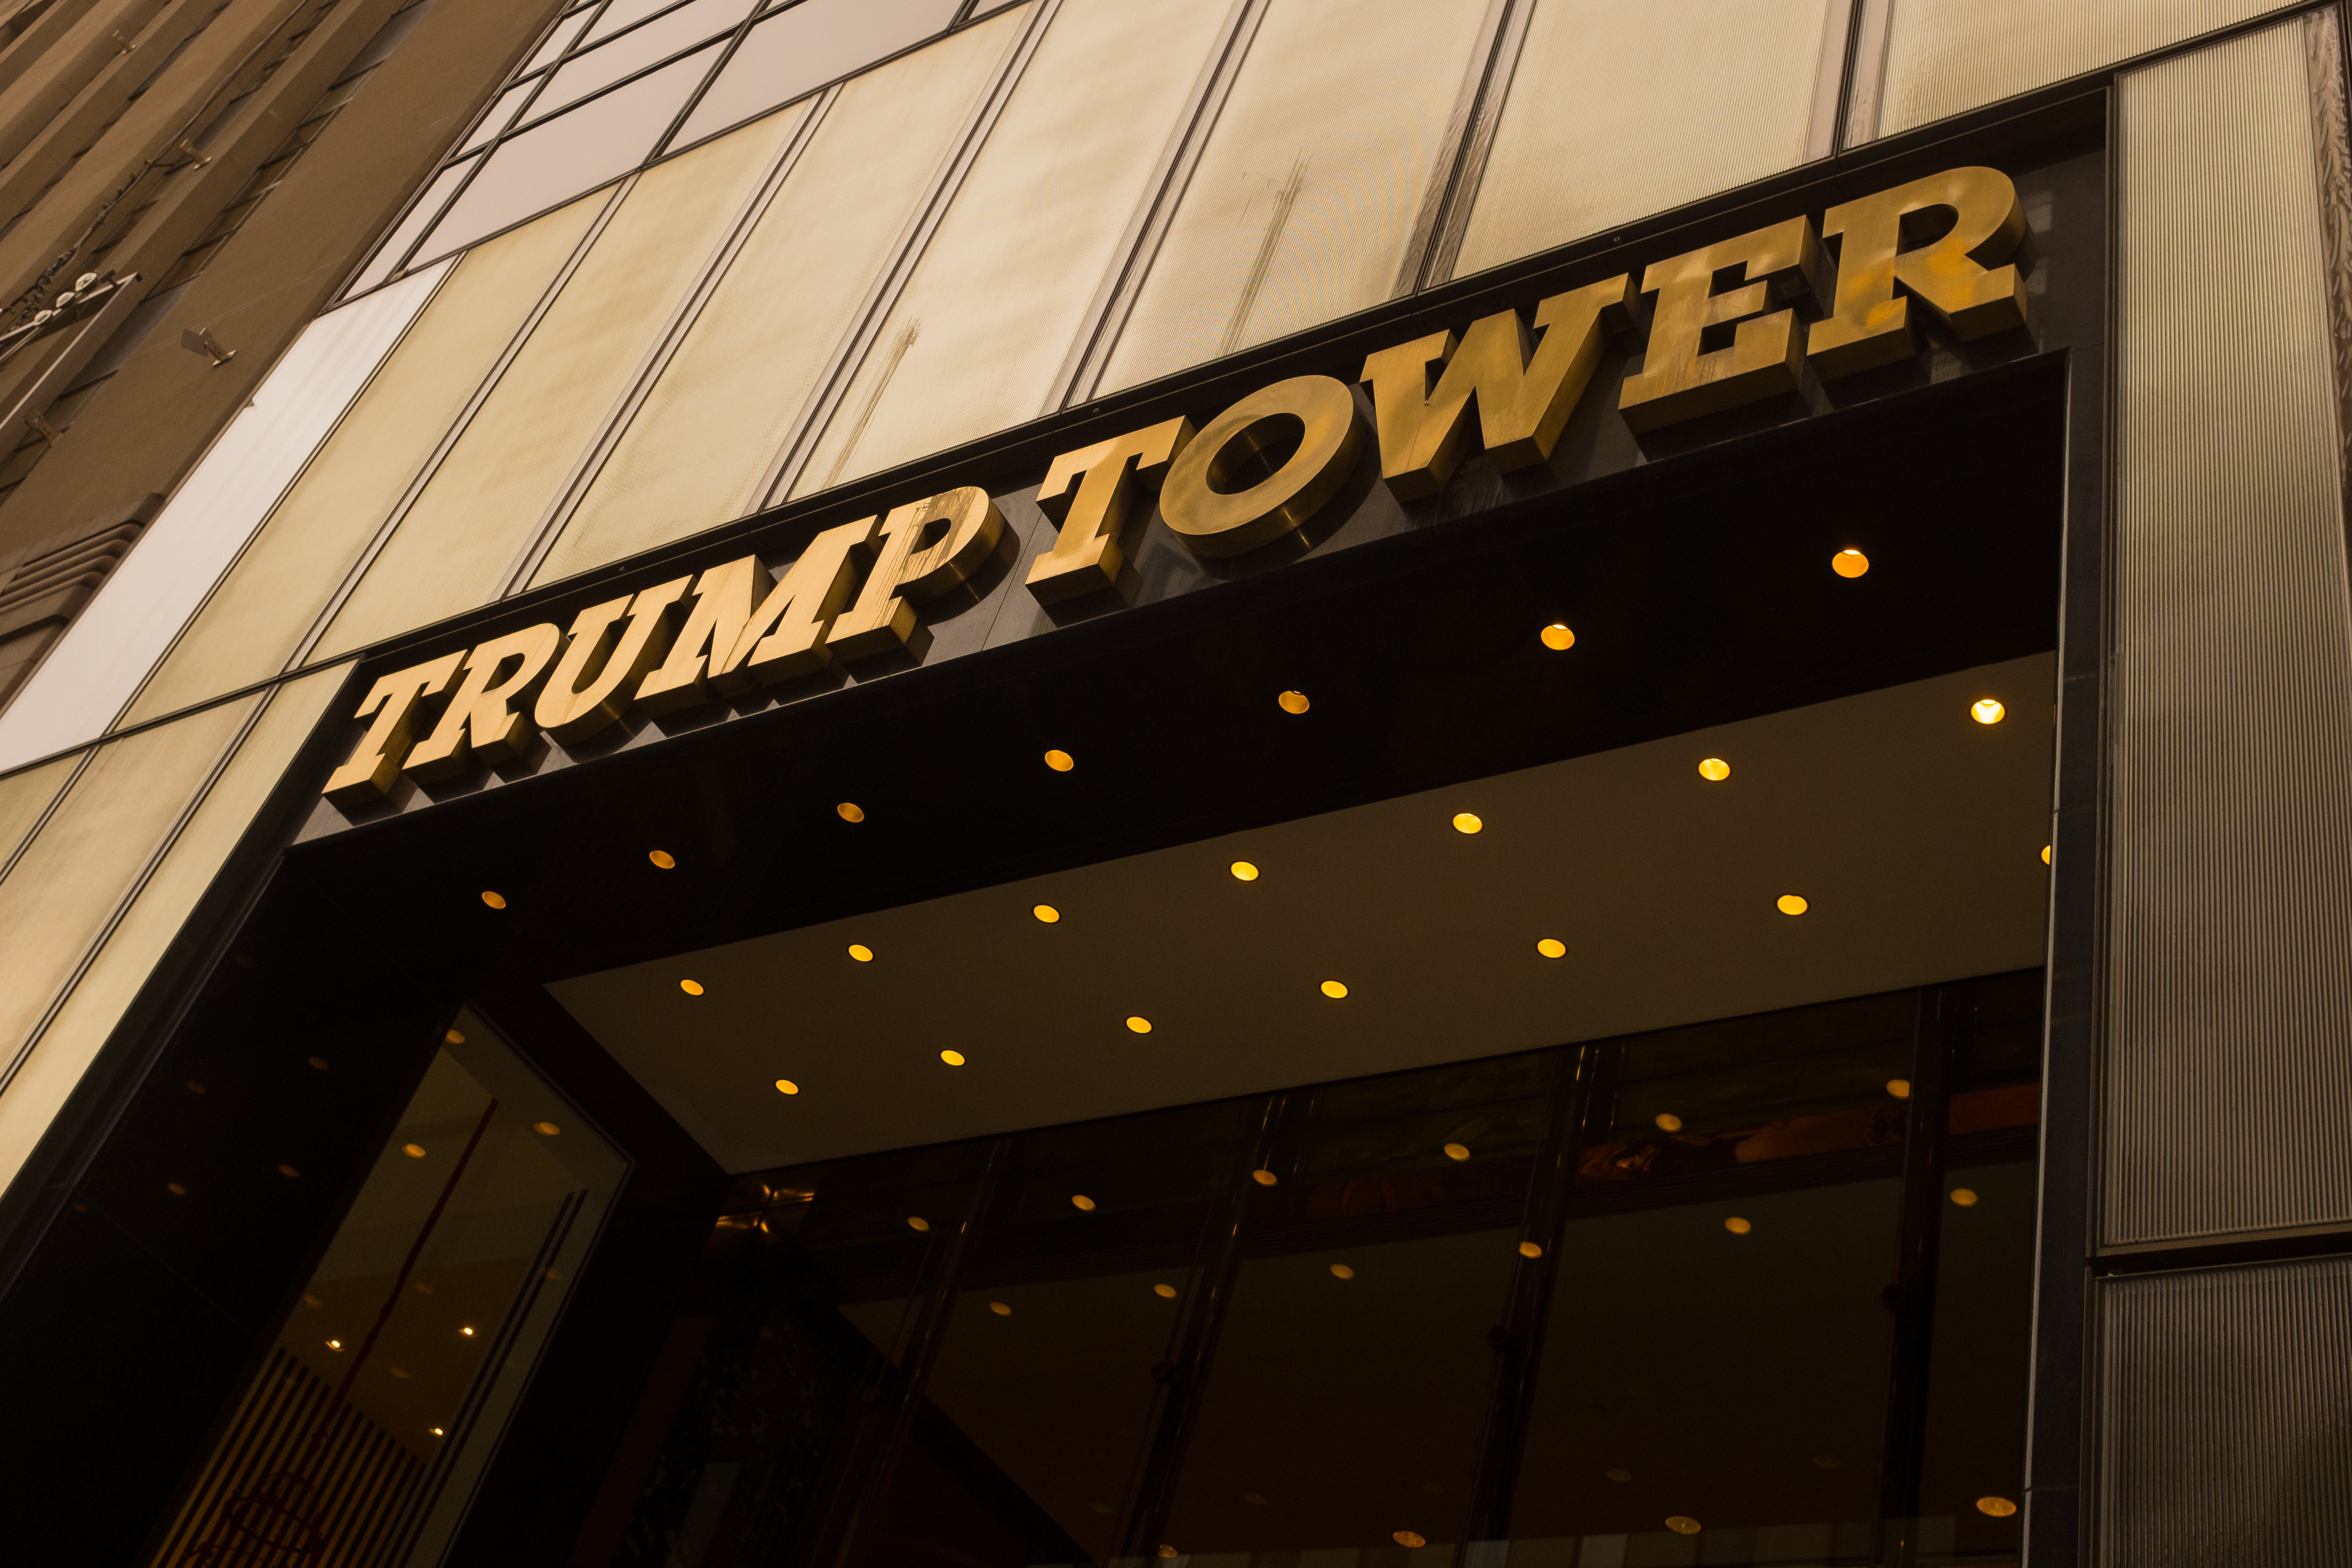 A general view of the signage above the entance to the Trump Tower on 21st January 2017 in midtown Manhattan, New York City (Epics—Getty Images)